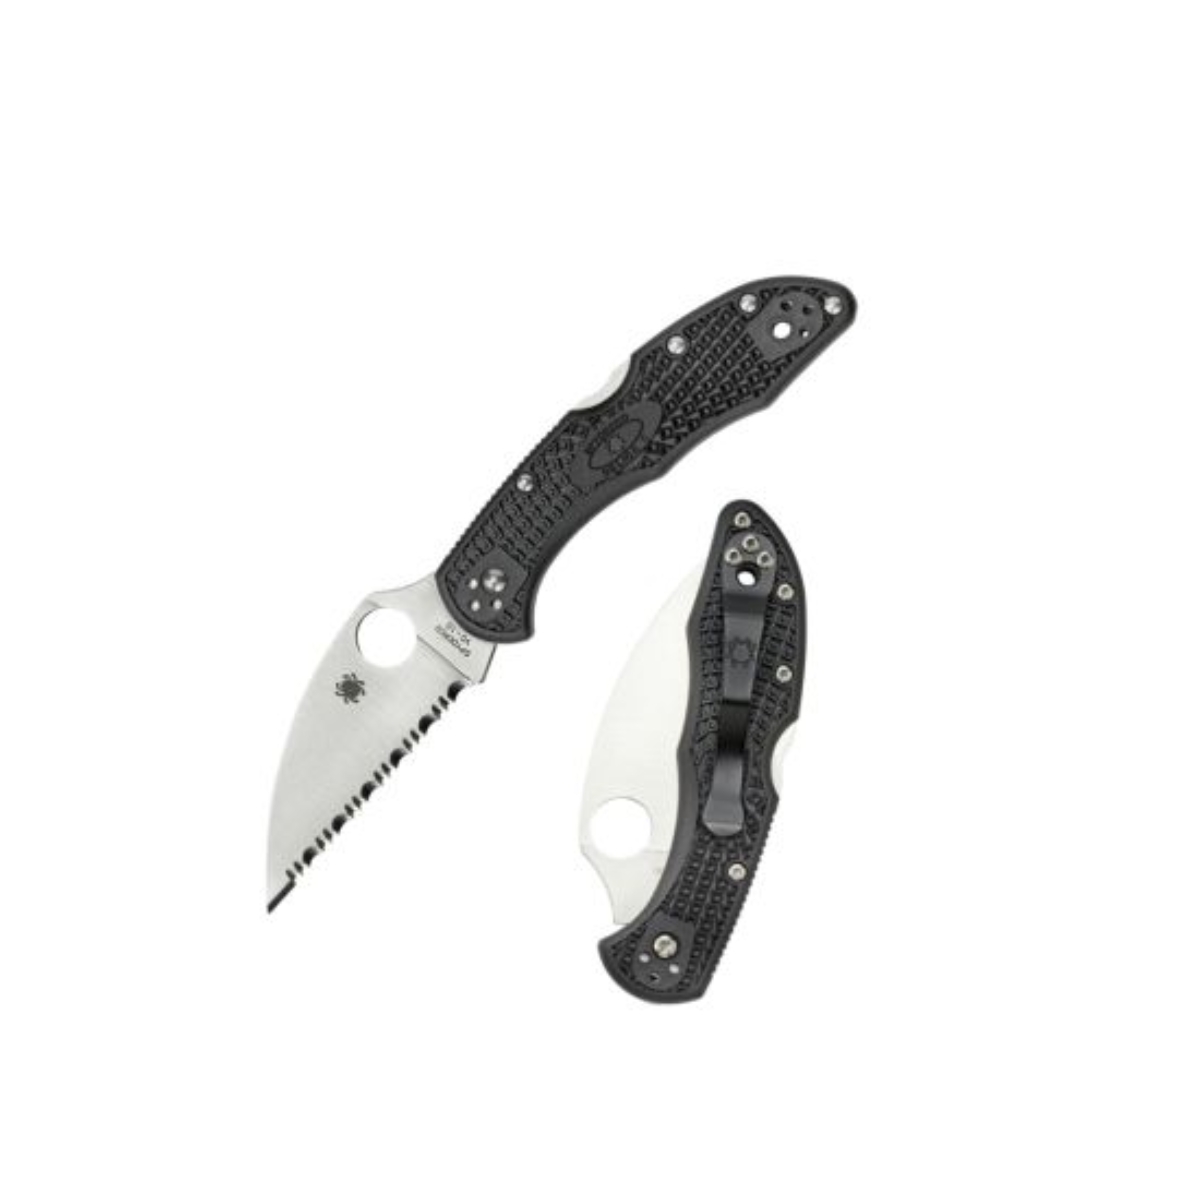 SPYDERCO DELICA FLAT WHARNCLIFFE SERRATED BLADE KNIFE